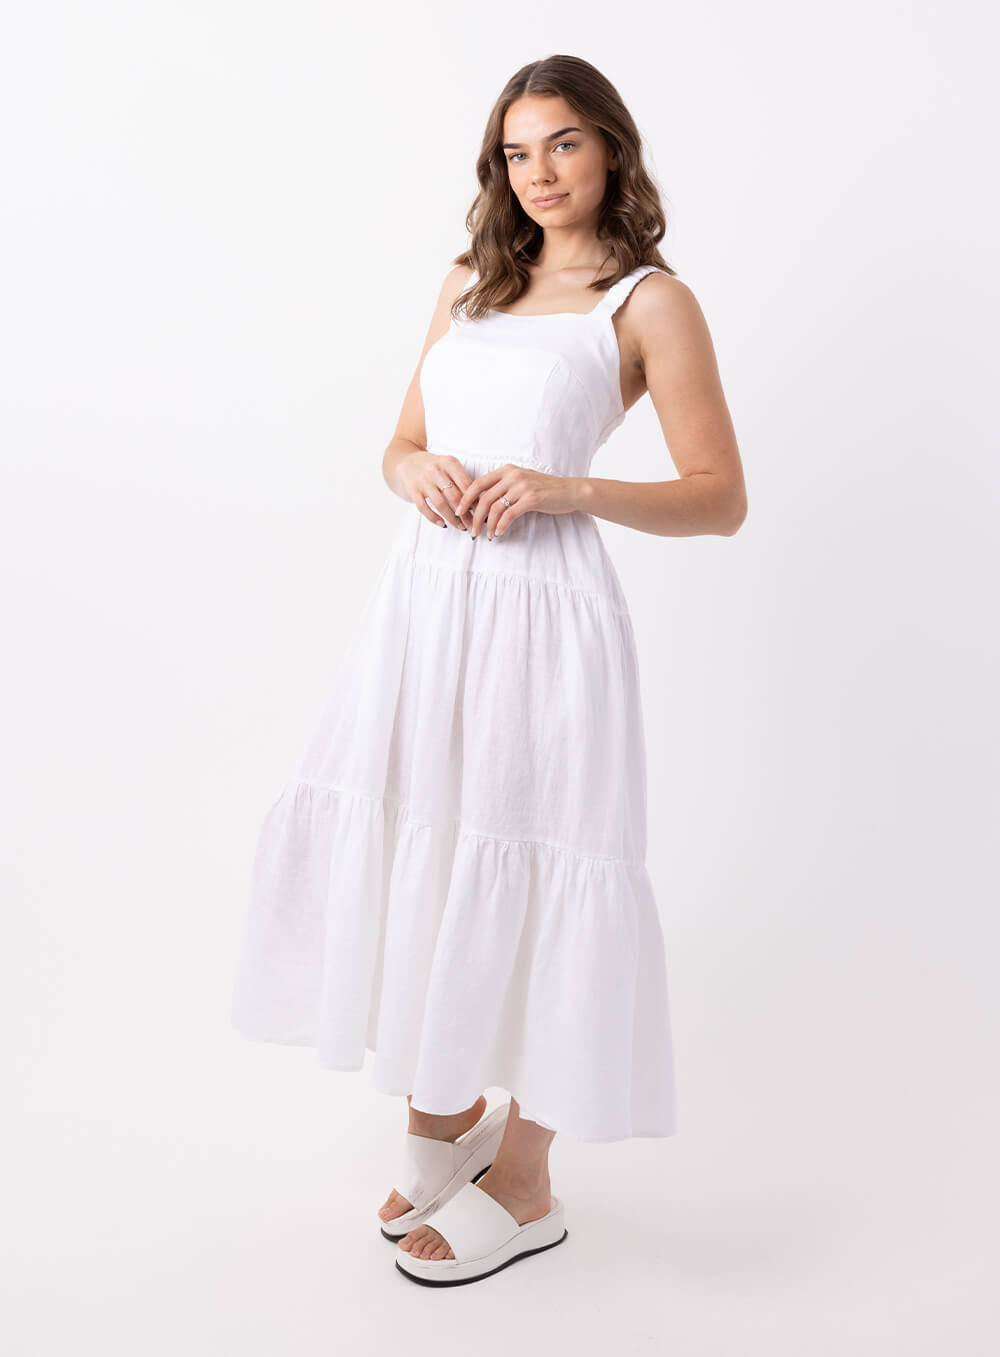 The Finlay Linen dress in white is made from 100% breathable linen, featuring a tiered skirt, thin rouched straps and 2 side pockets